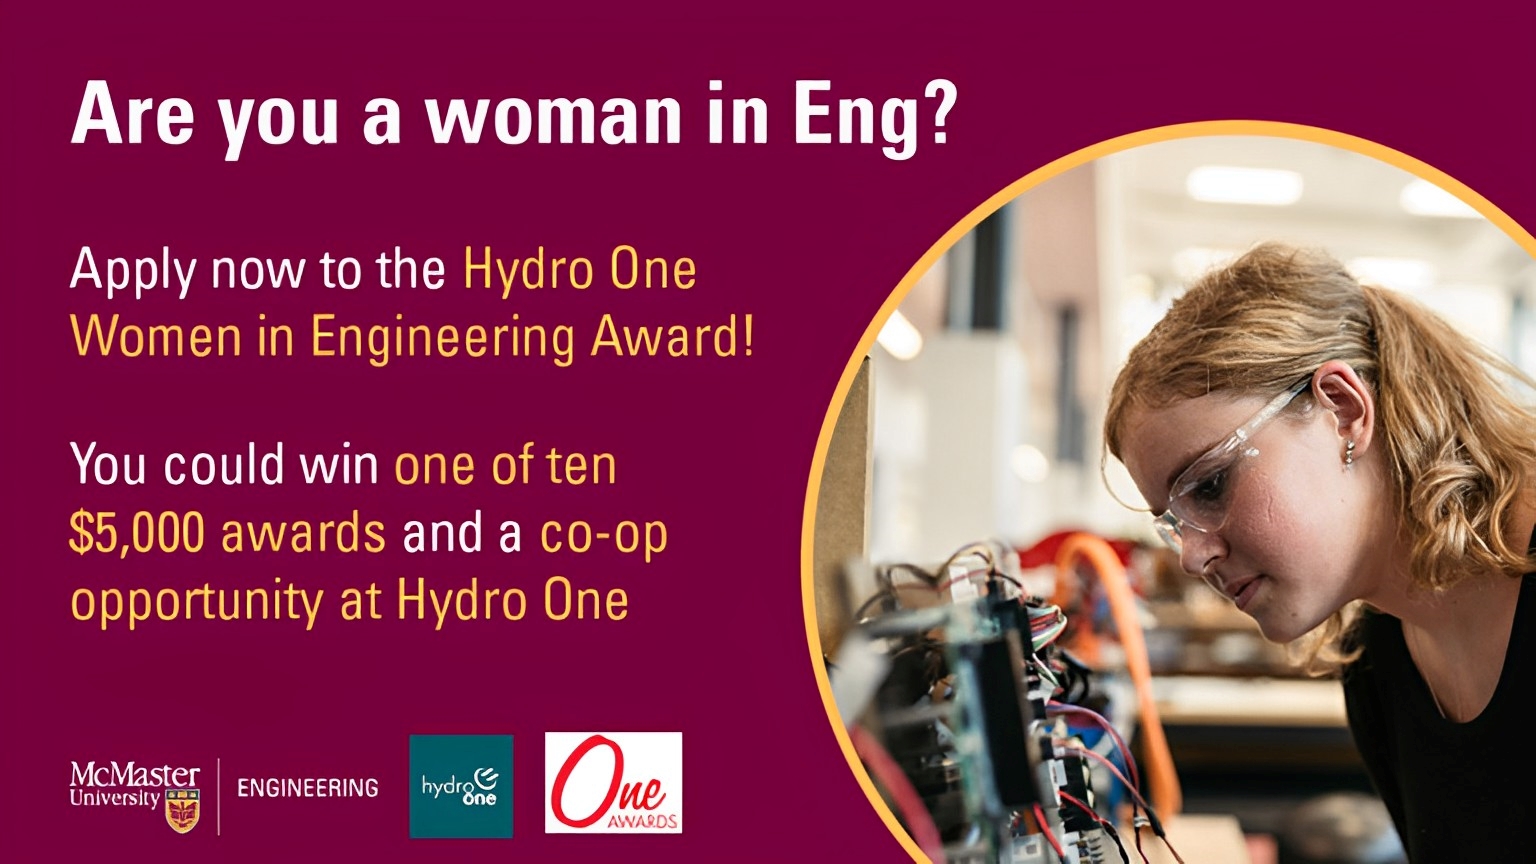 Graphic saying are you a woman in Eng? and advertising the Hydro One Women In Engineering Award.